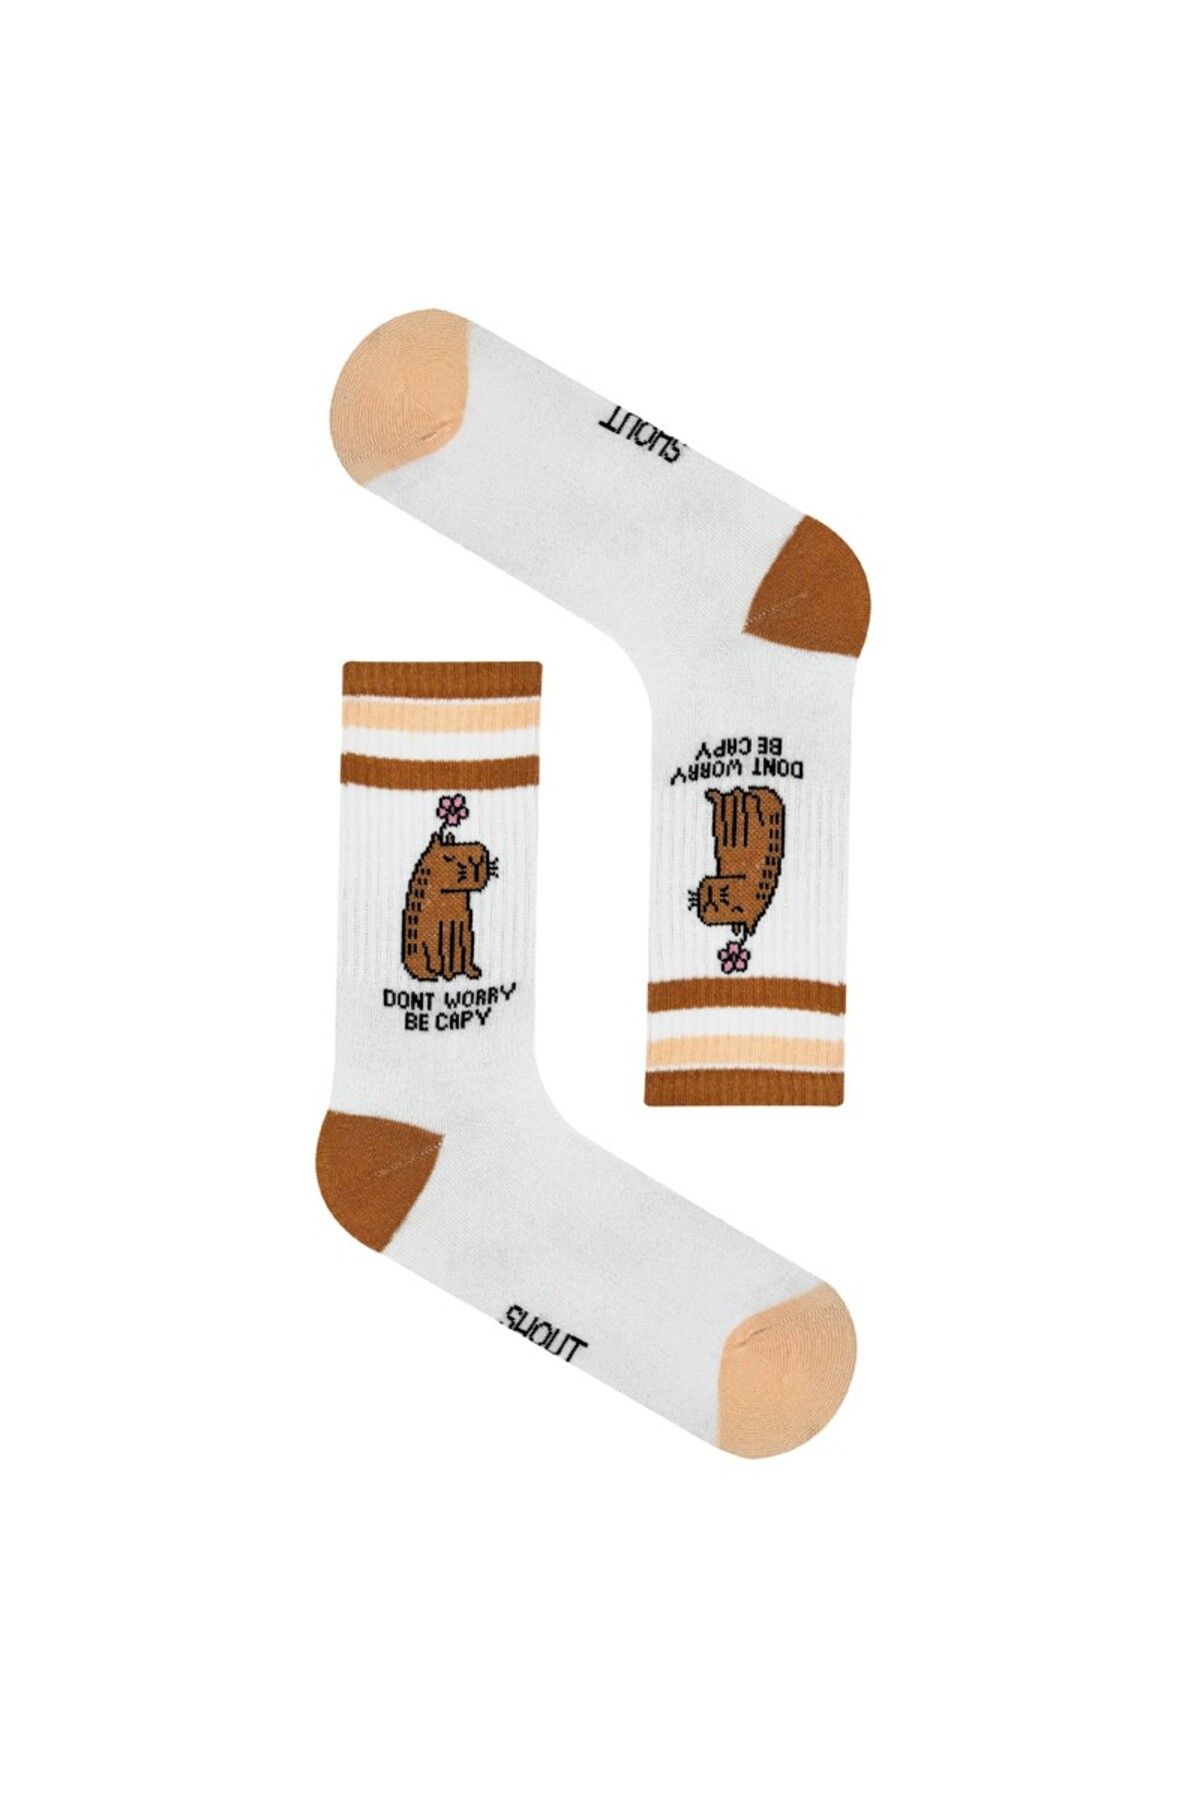 Shout Unisex Dont Worry Be Capy One Size Sock